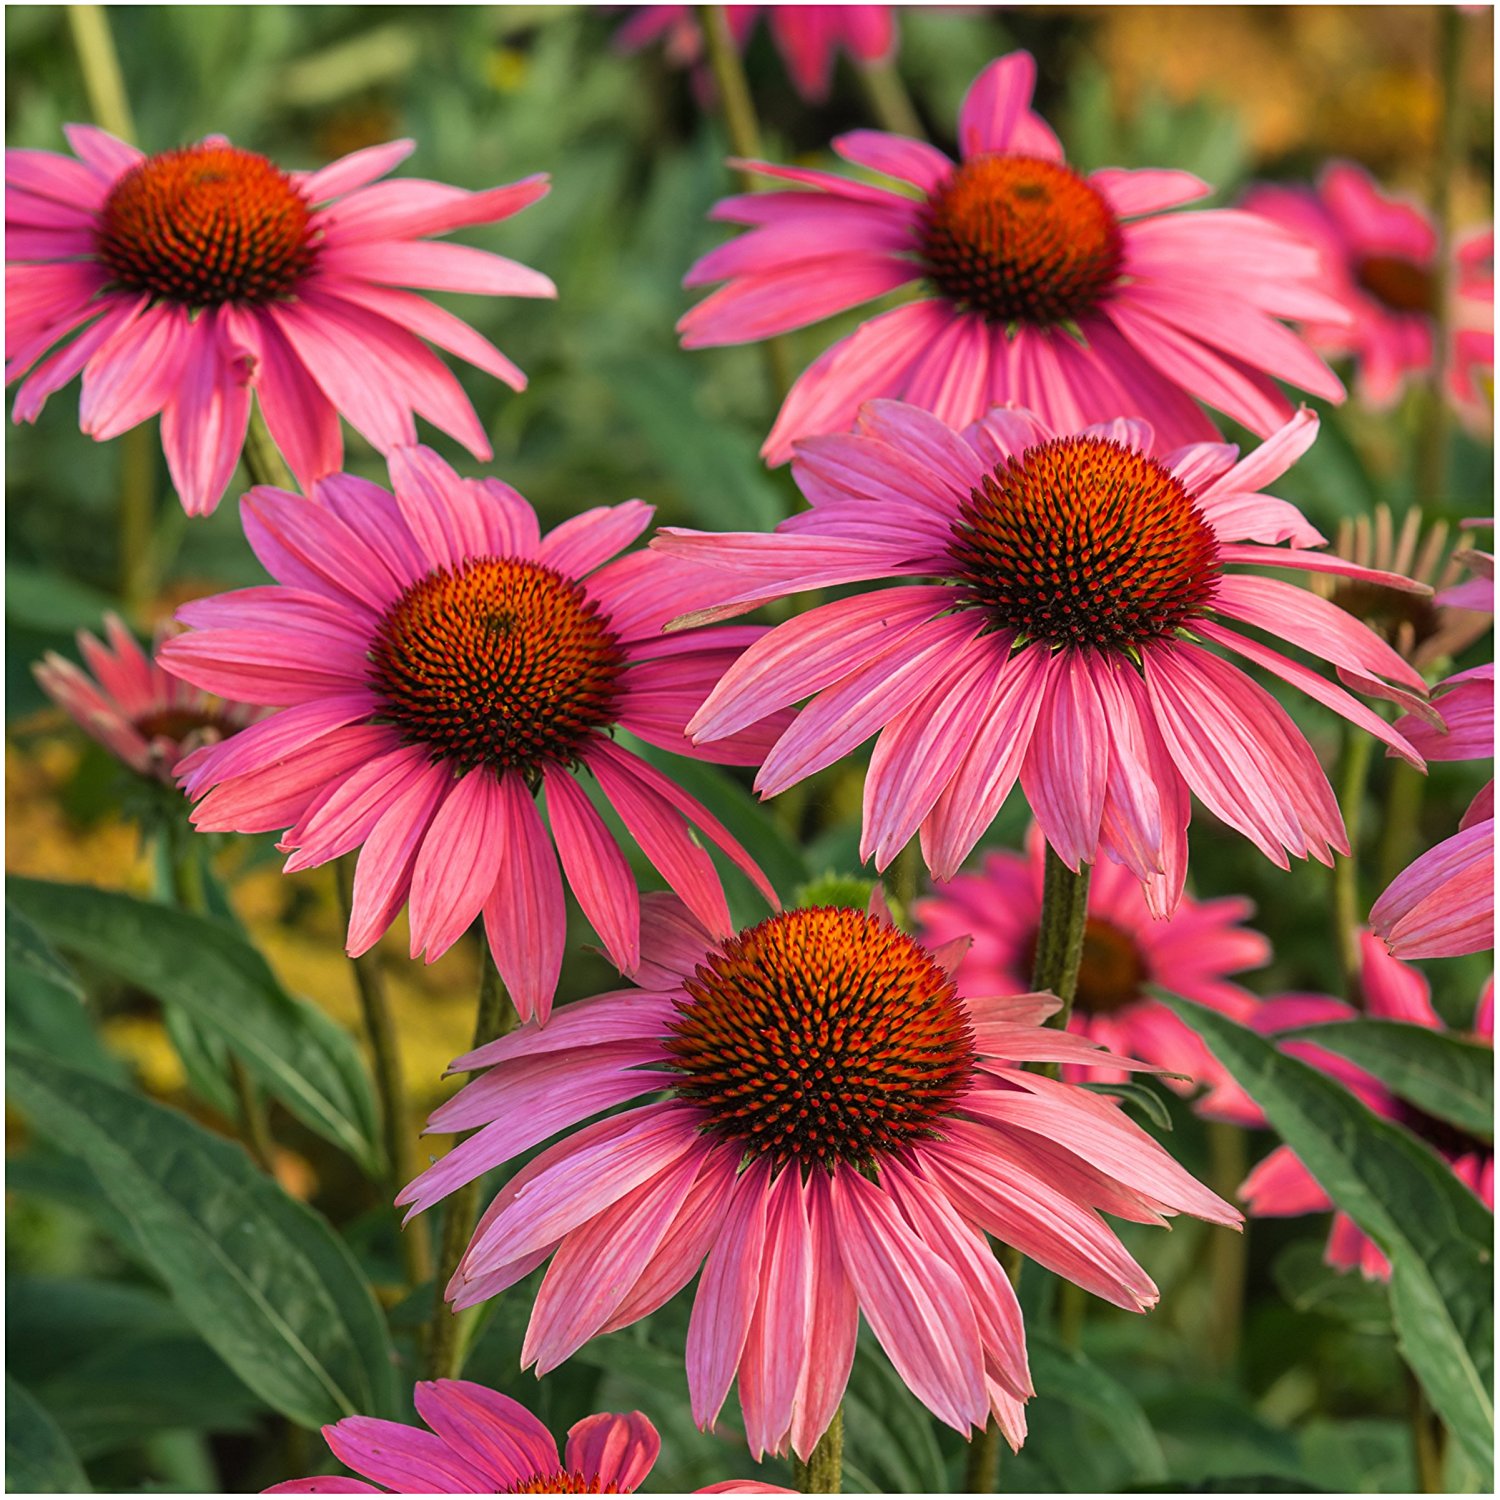 Amazon.com : Package of 25 Seeds, Ruby Star Coneflower (Echinacea ...